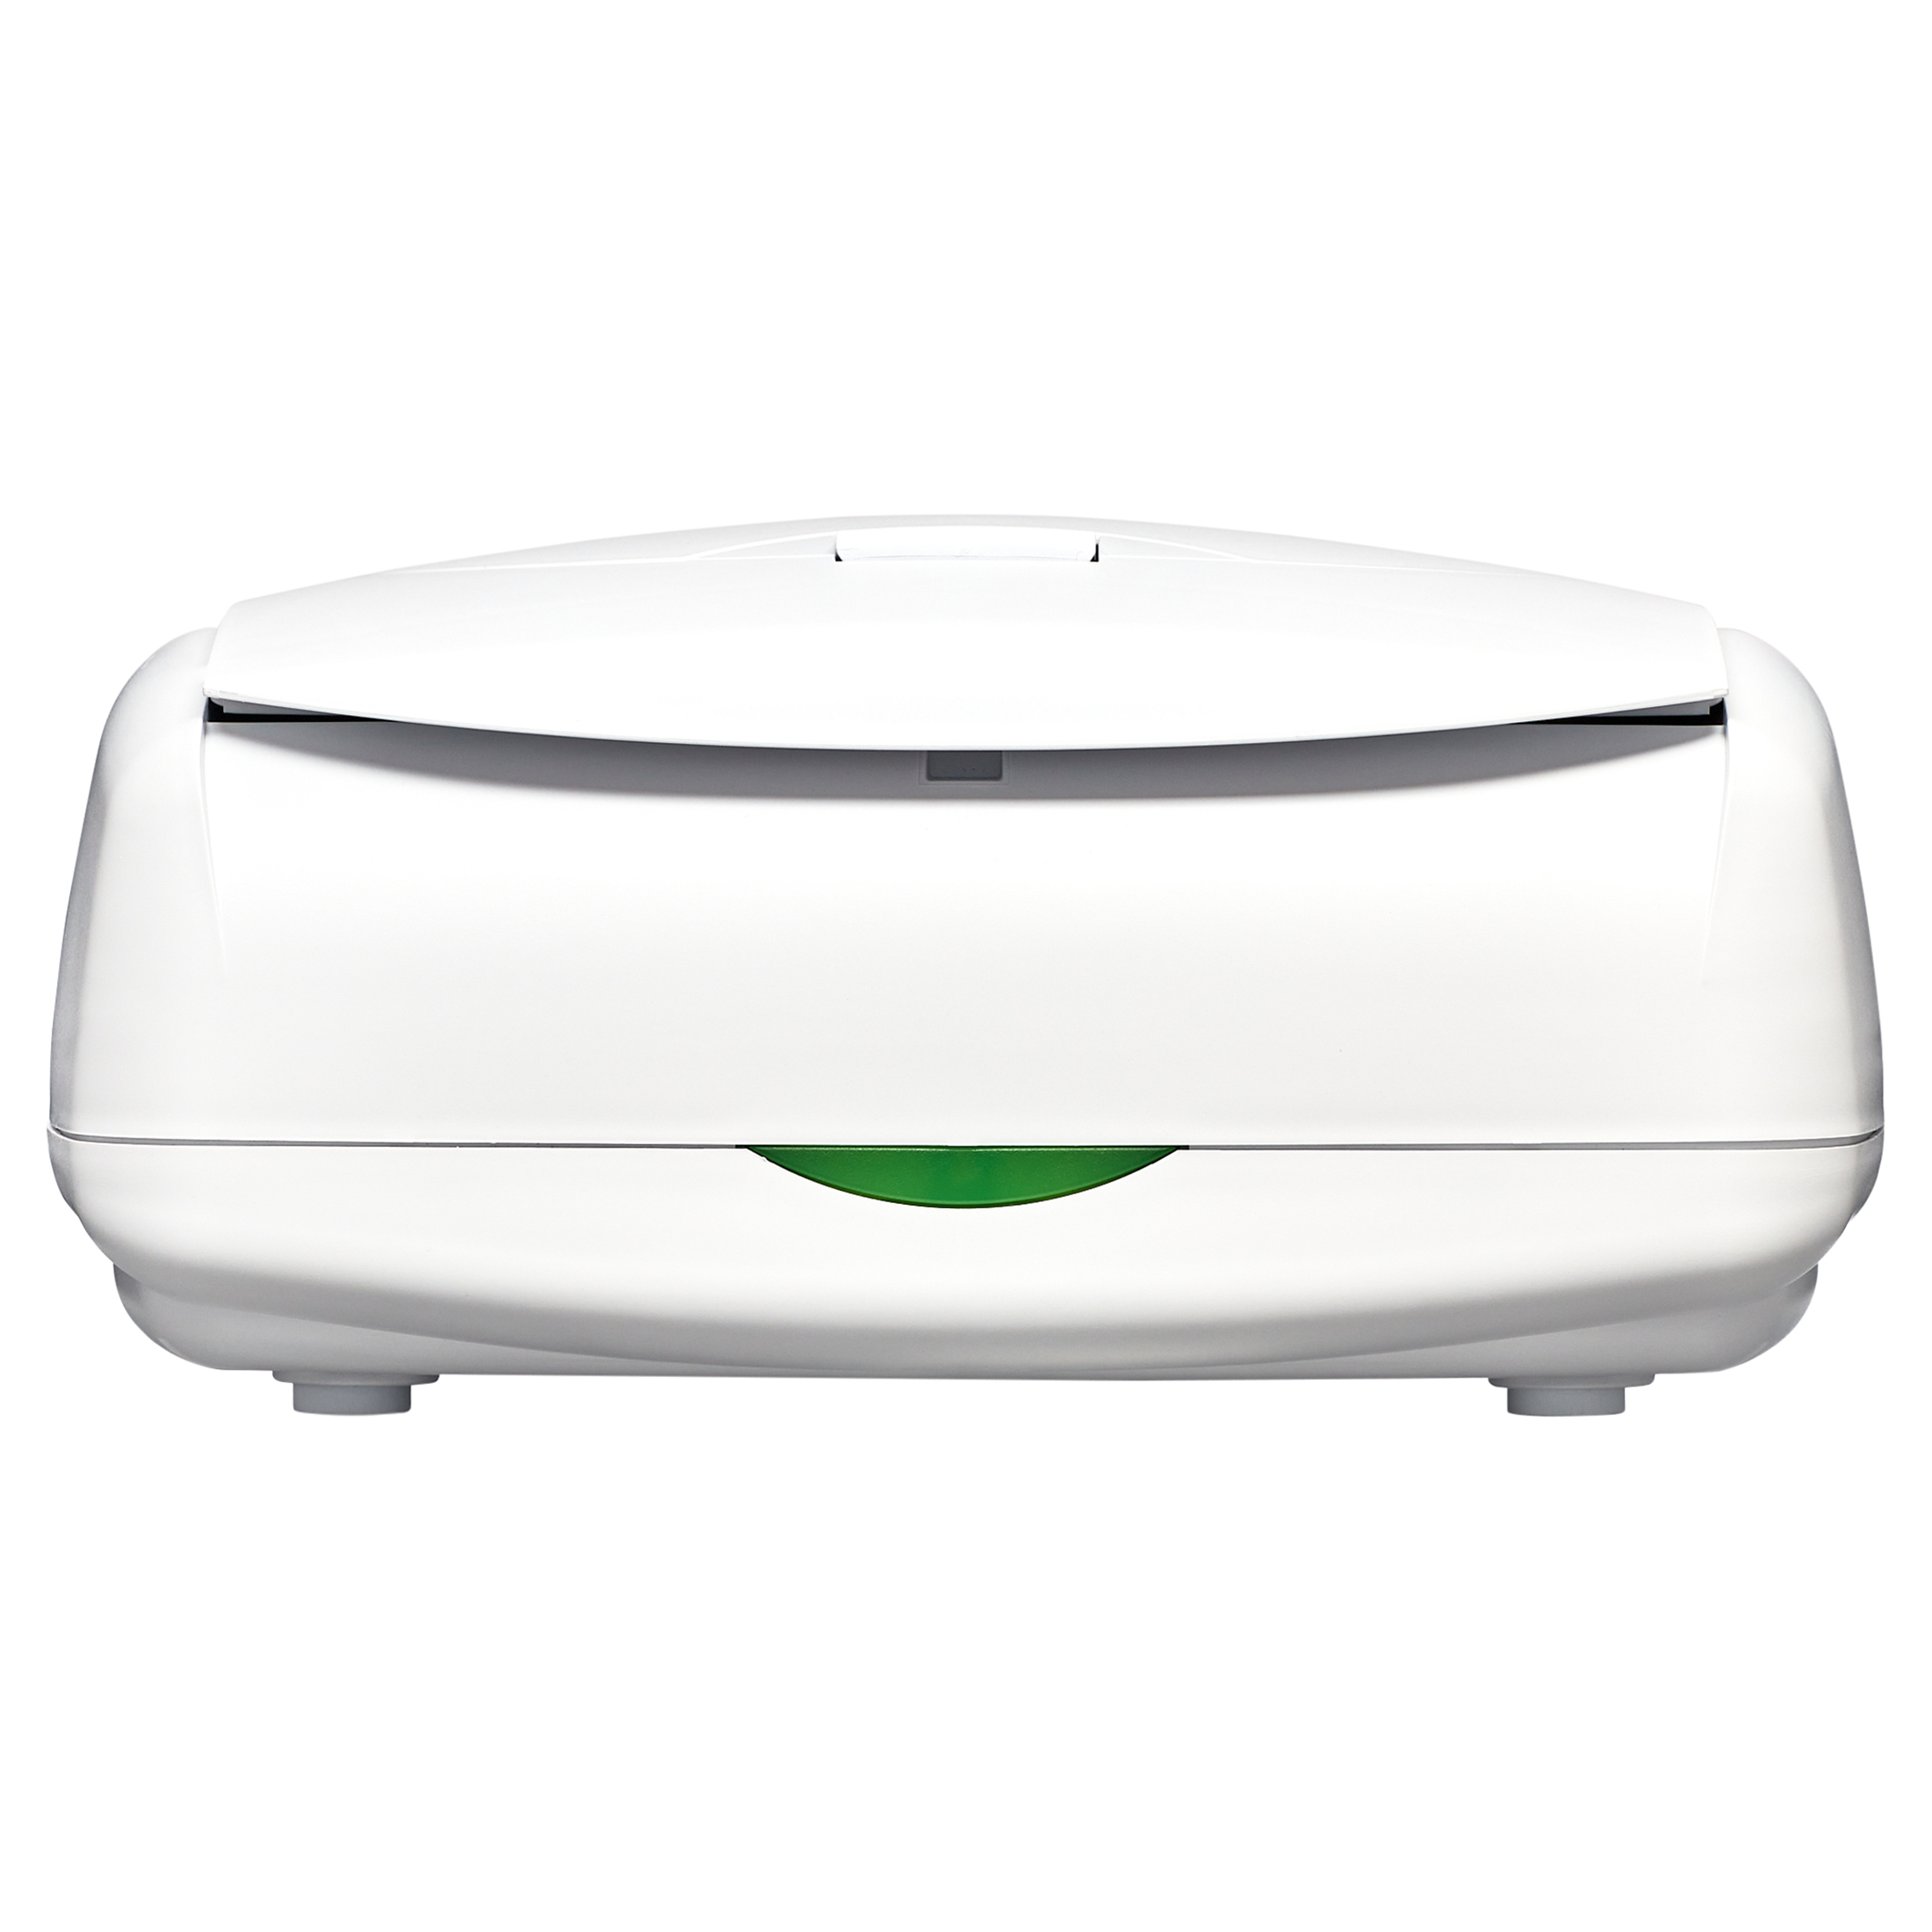 Prince Lionheart Ultimate Wipes Warmer with Integrated Nightlight and ever Fresh System for Pop-Up Wipe Access, No Dry Out - image 4 of 8